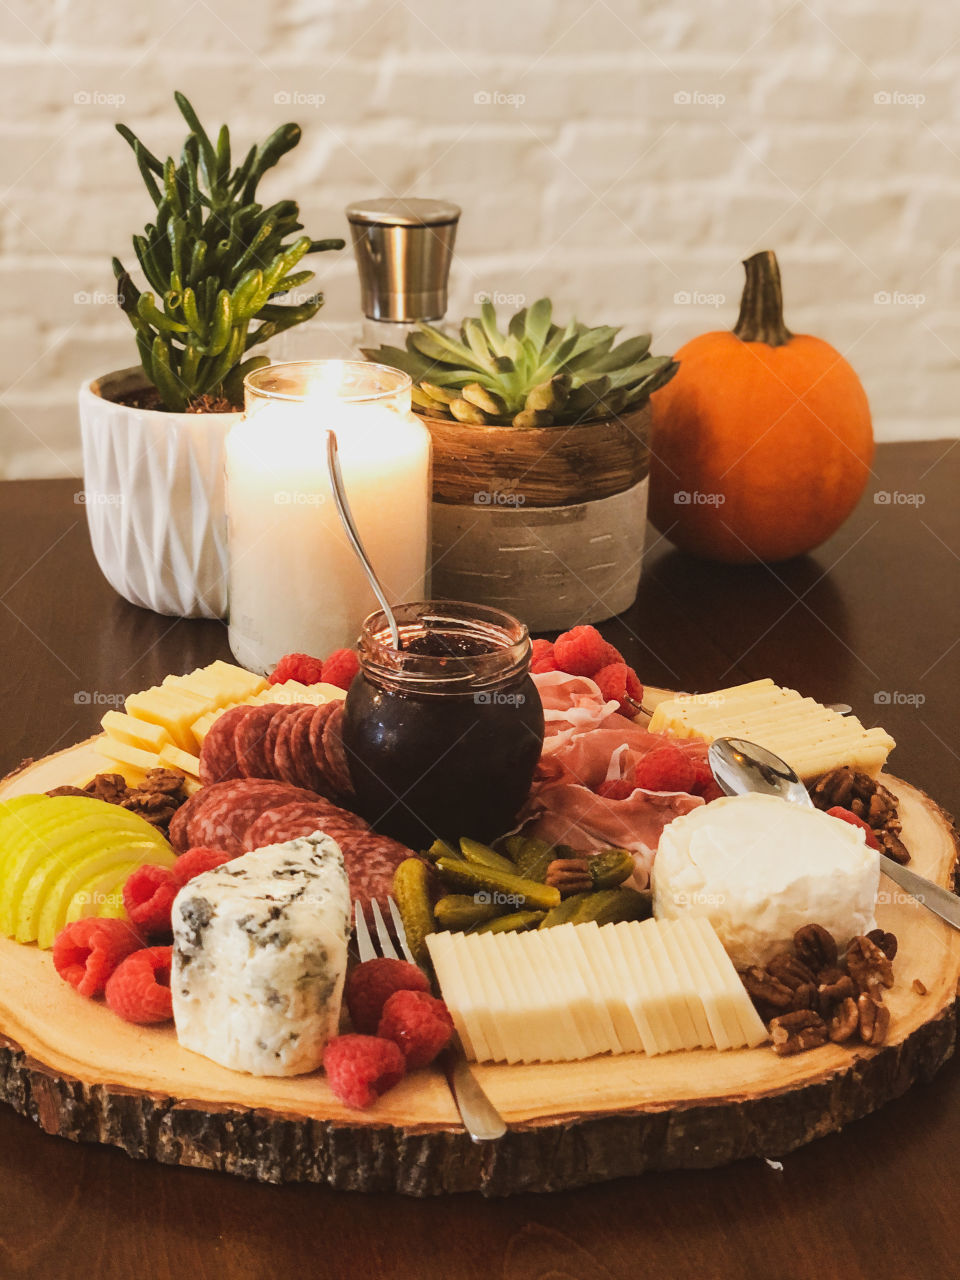 Our very own Charcuterie Board | Perfect for anyone who come over a place to visit, chat and for catching up